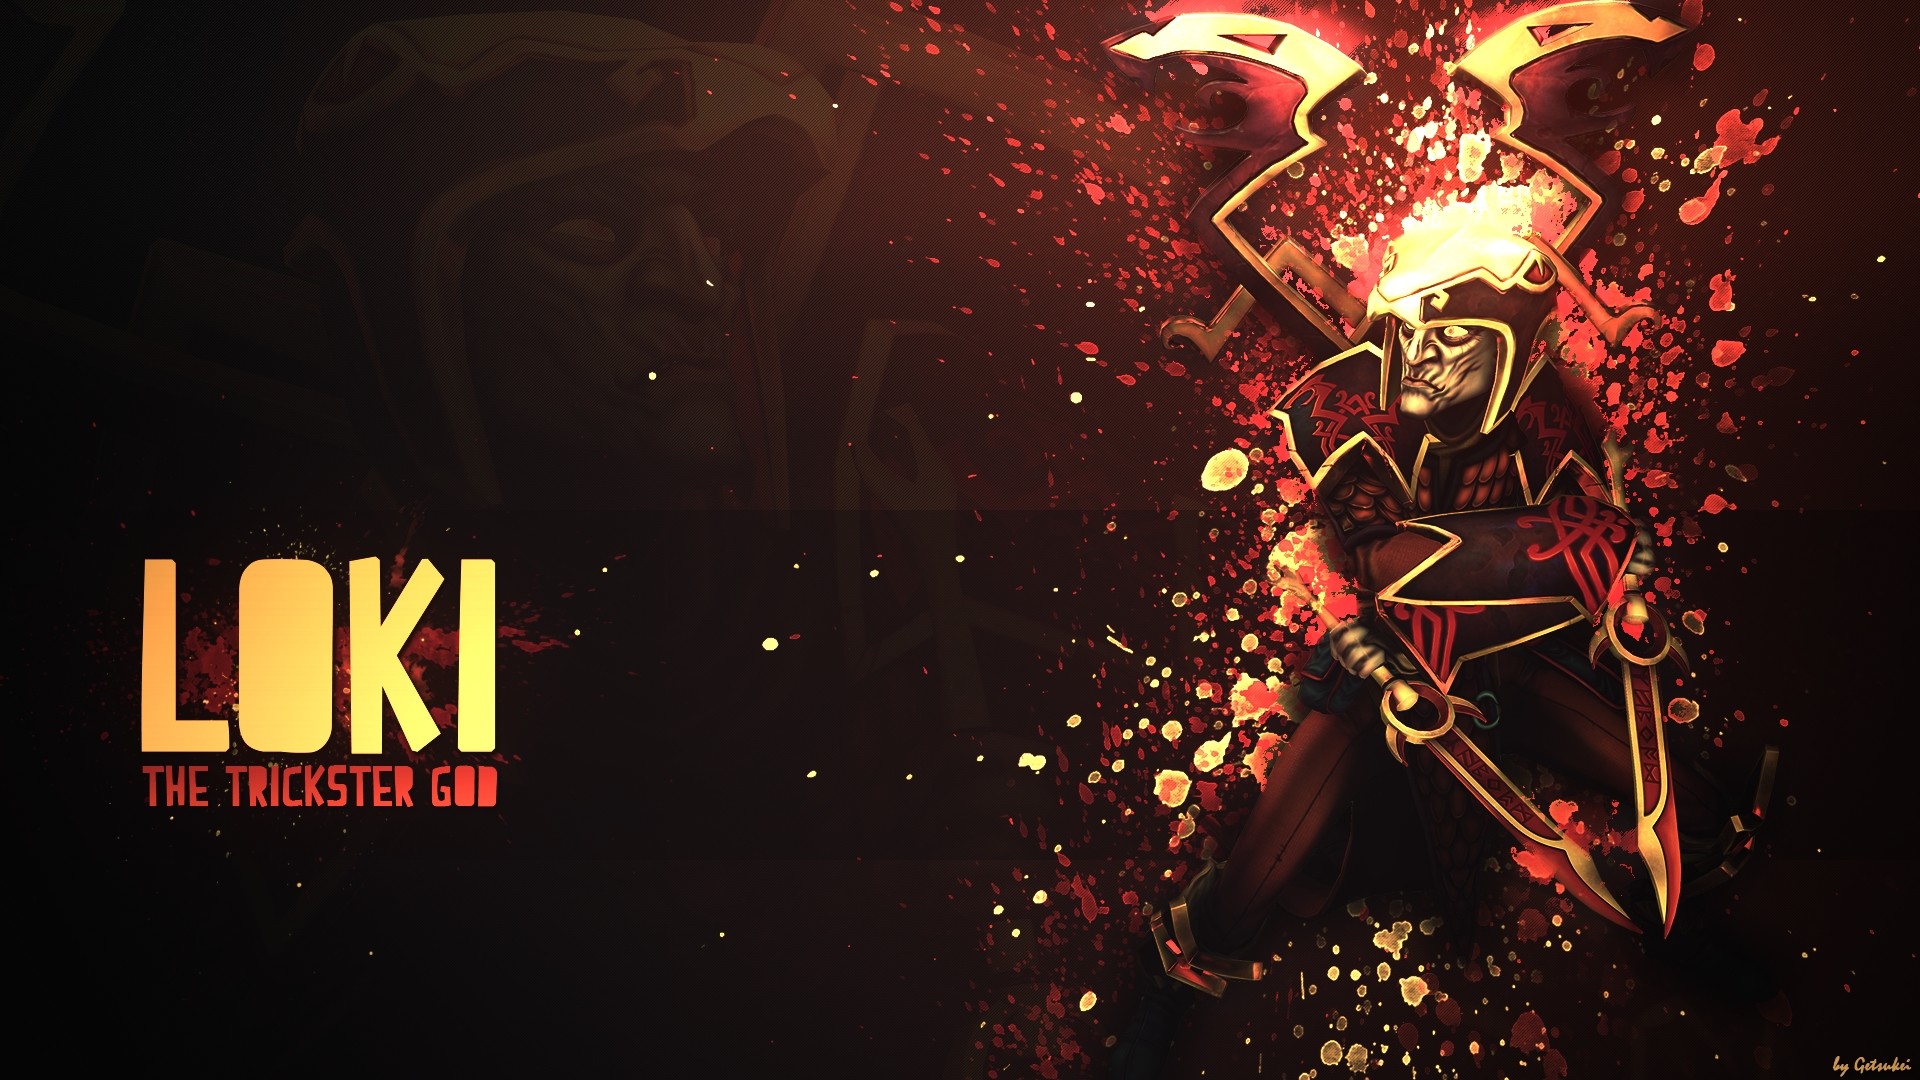 1920x1080 ... The Trickster God - Wallpaper HD by Getsukeii